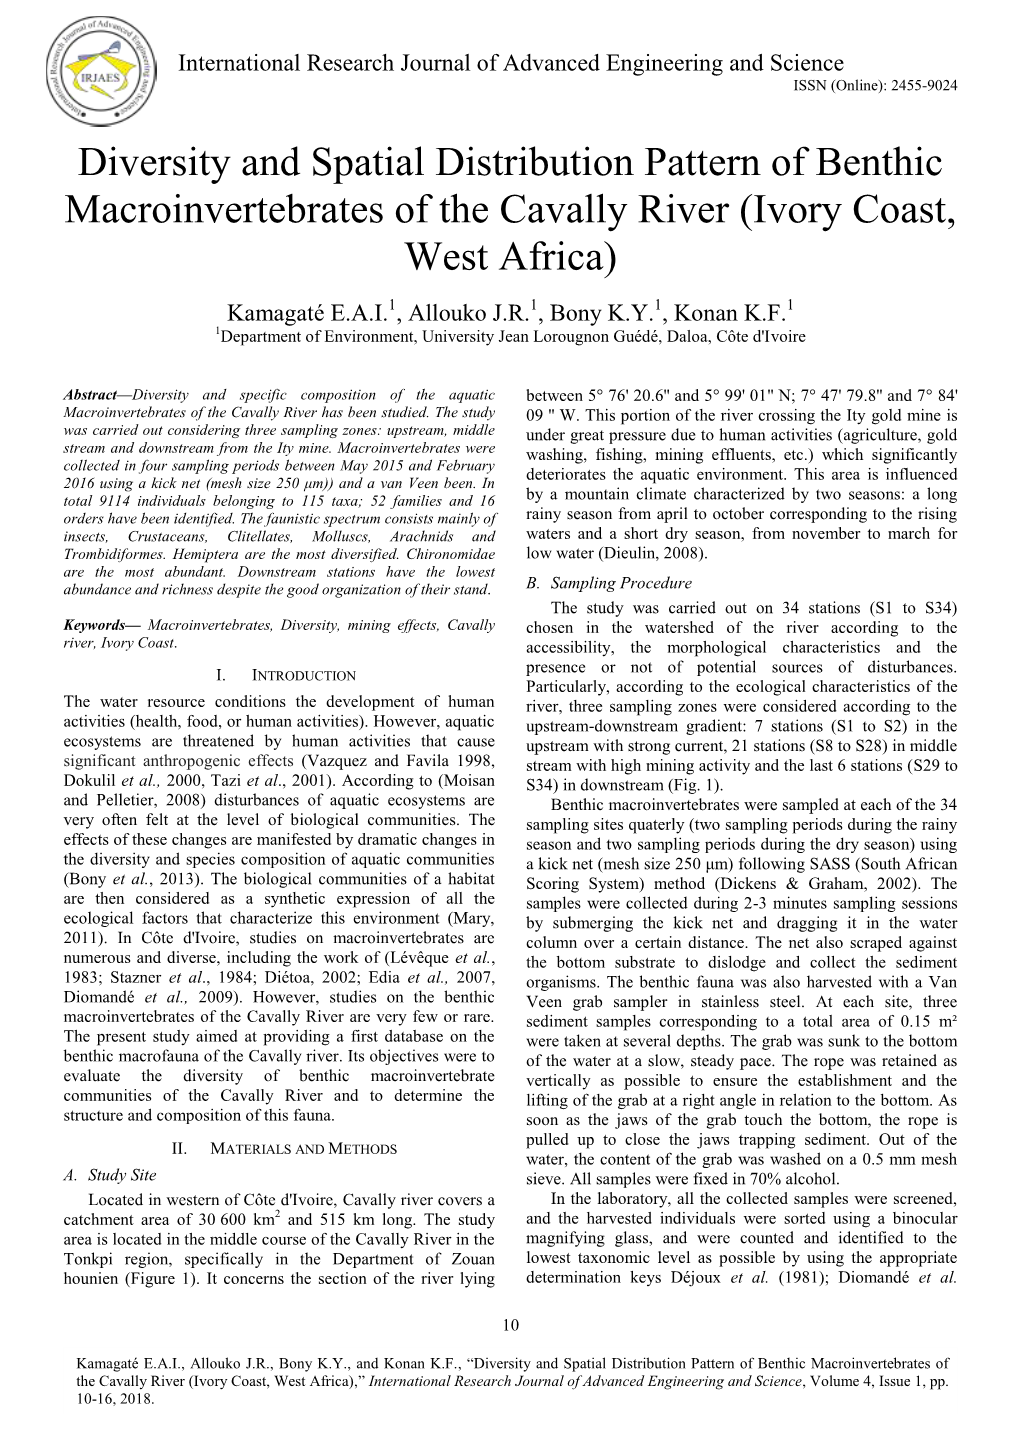 Diversity and Spatial Distribution Pattern of Benthic Macroinvertebrates of the Cavally River (Ivory Coast, West Africa)